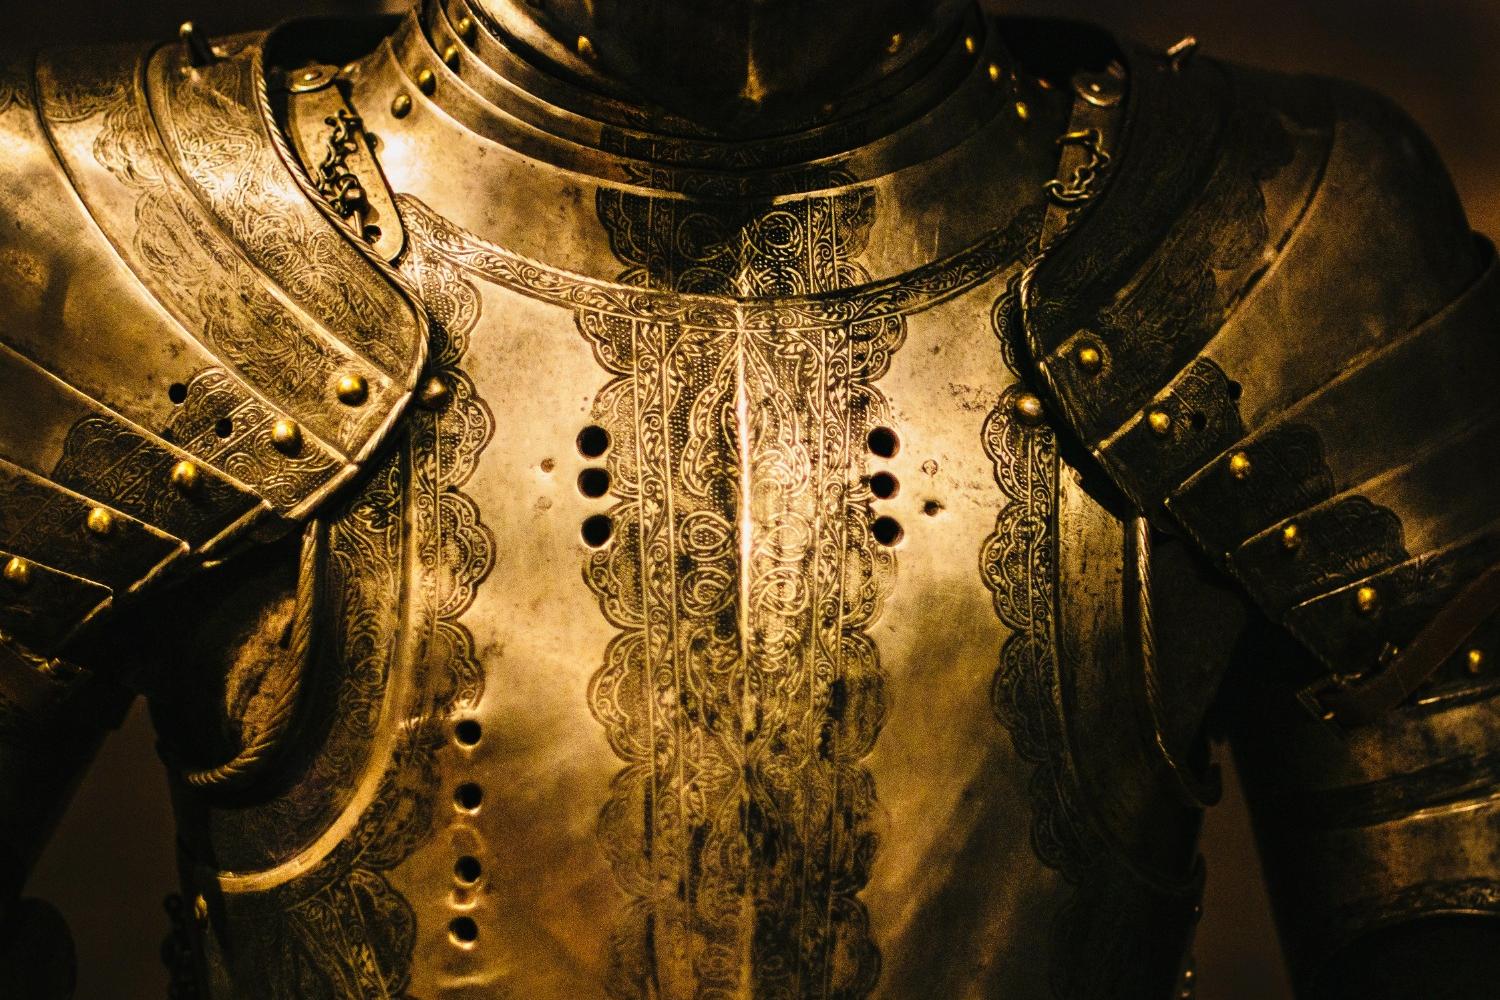 A suit of armor